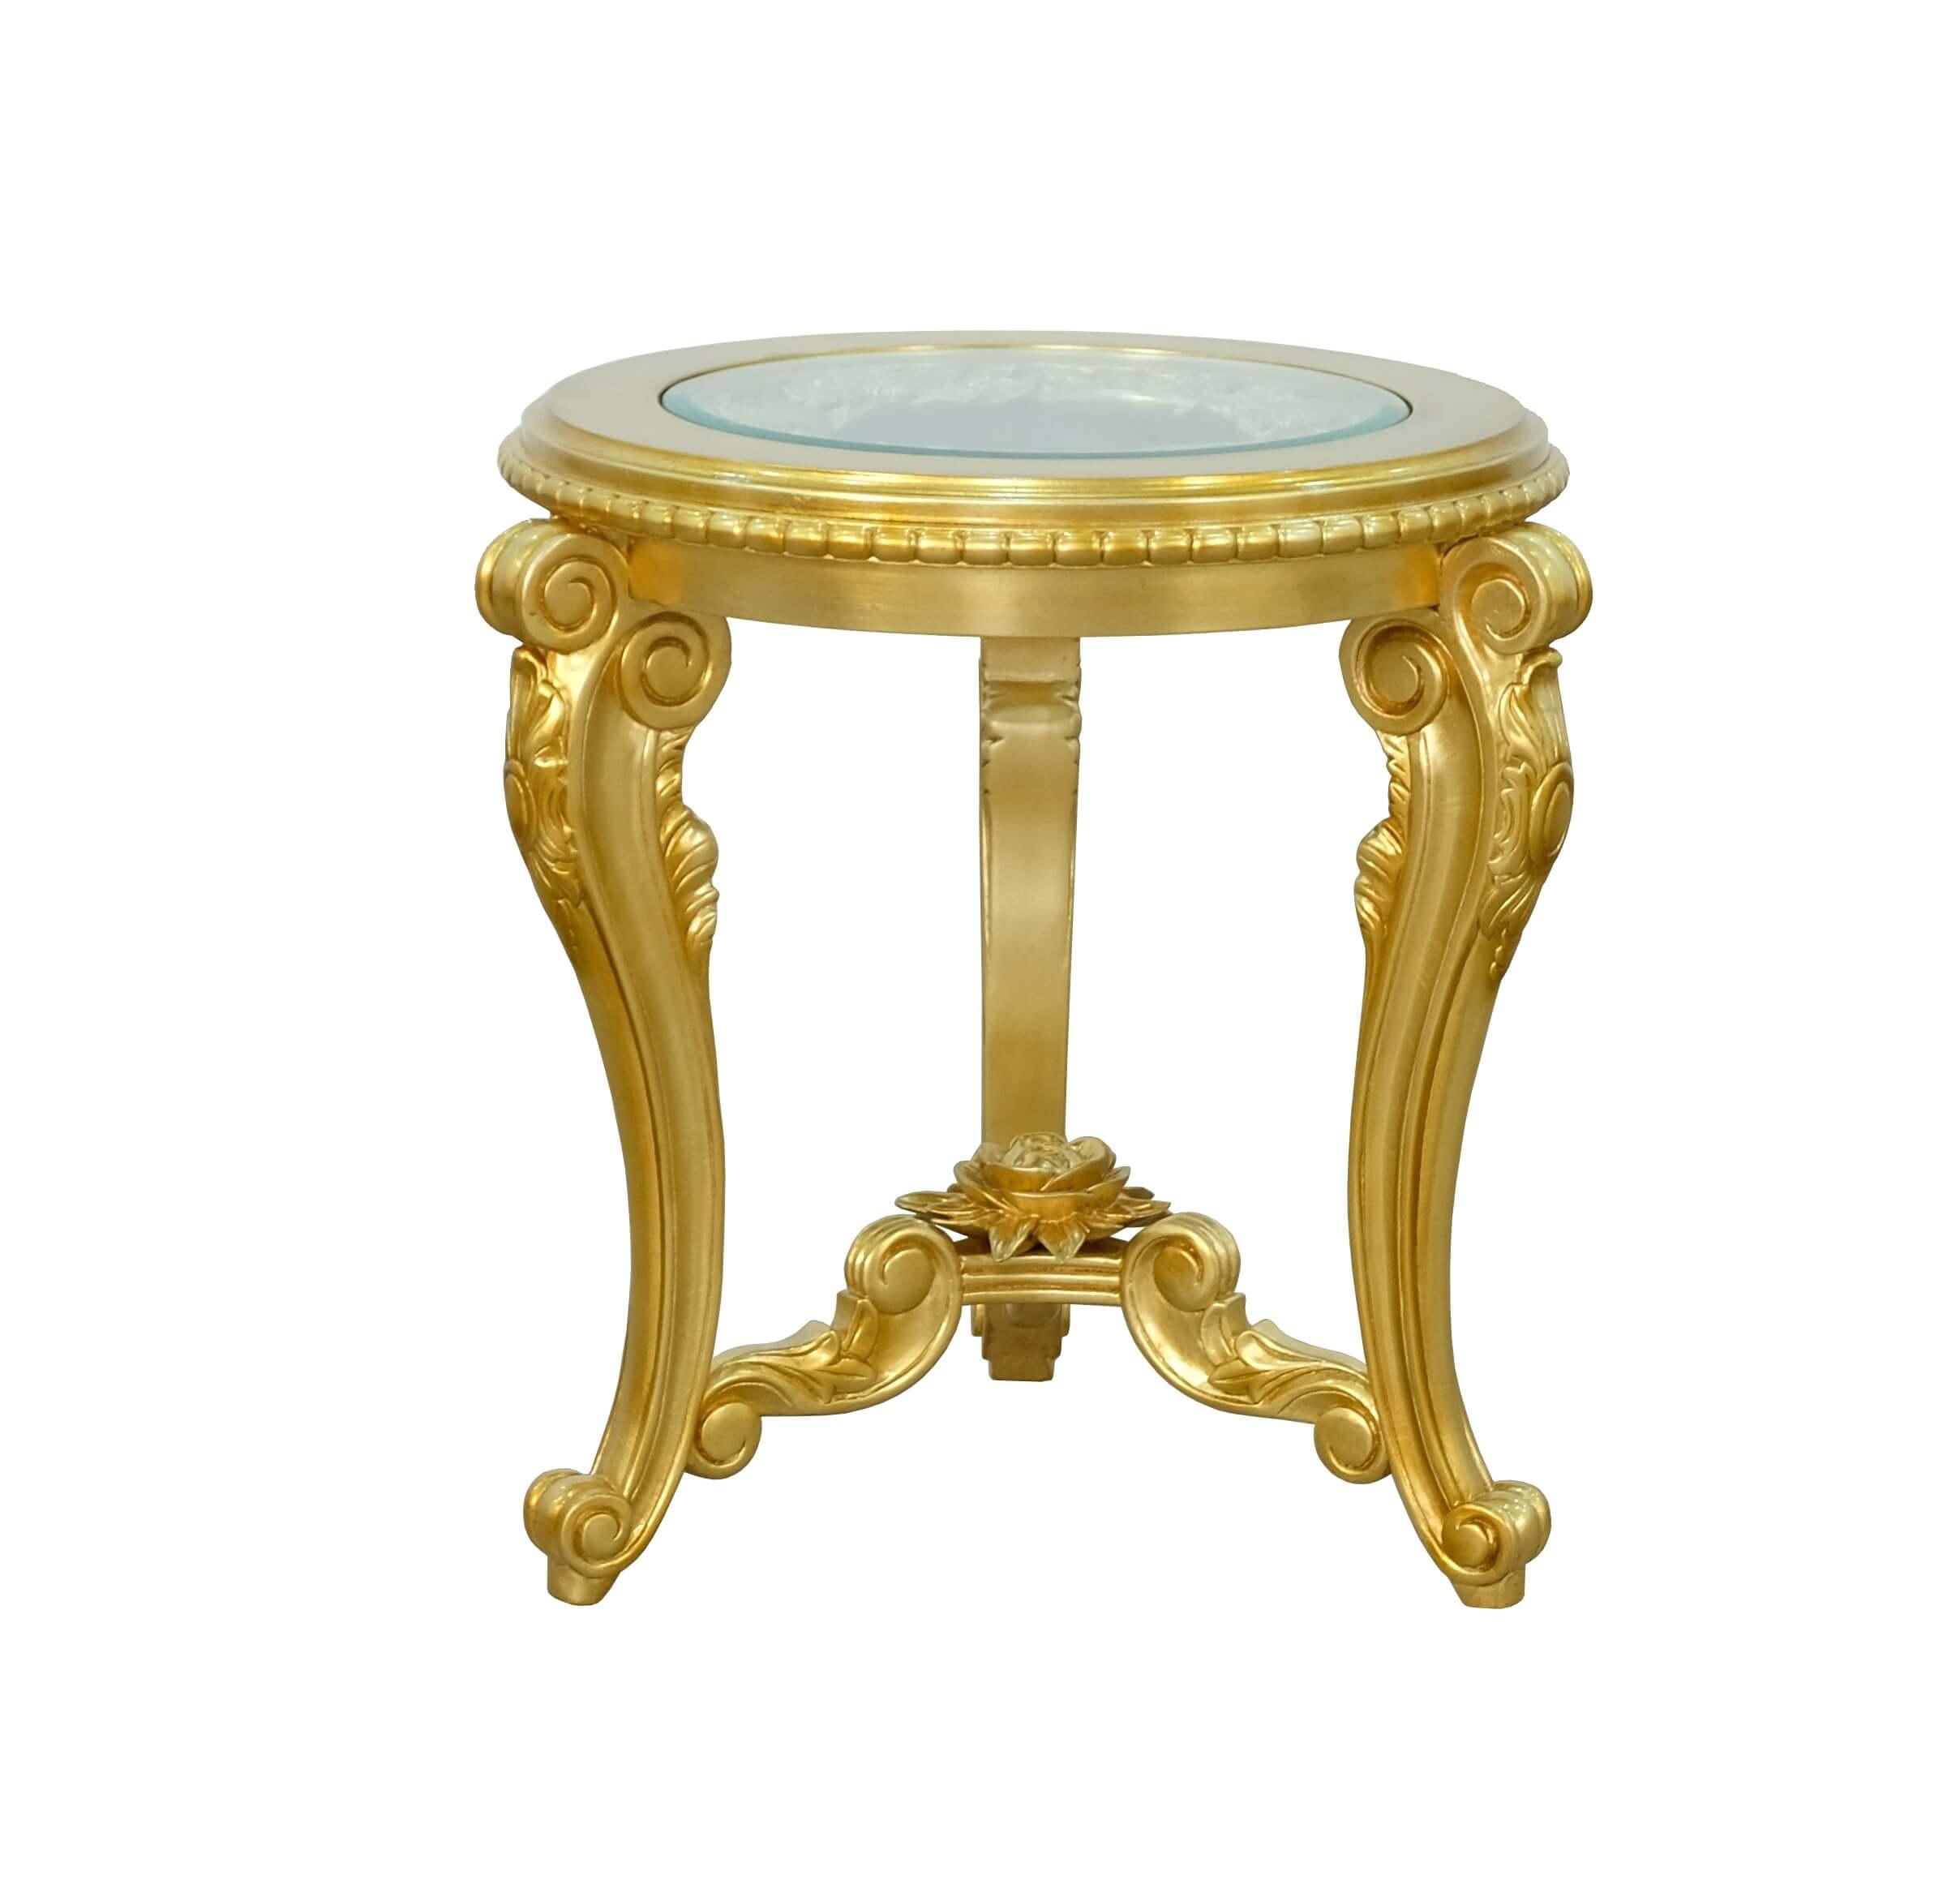 Classic, Traditional End Table LUXOR 68584-ET in Antique, Gold 